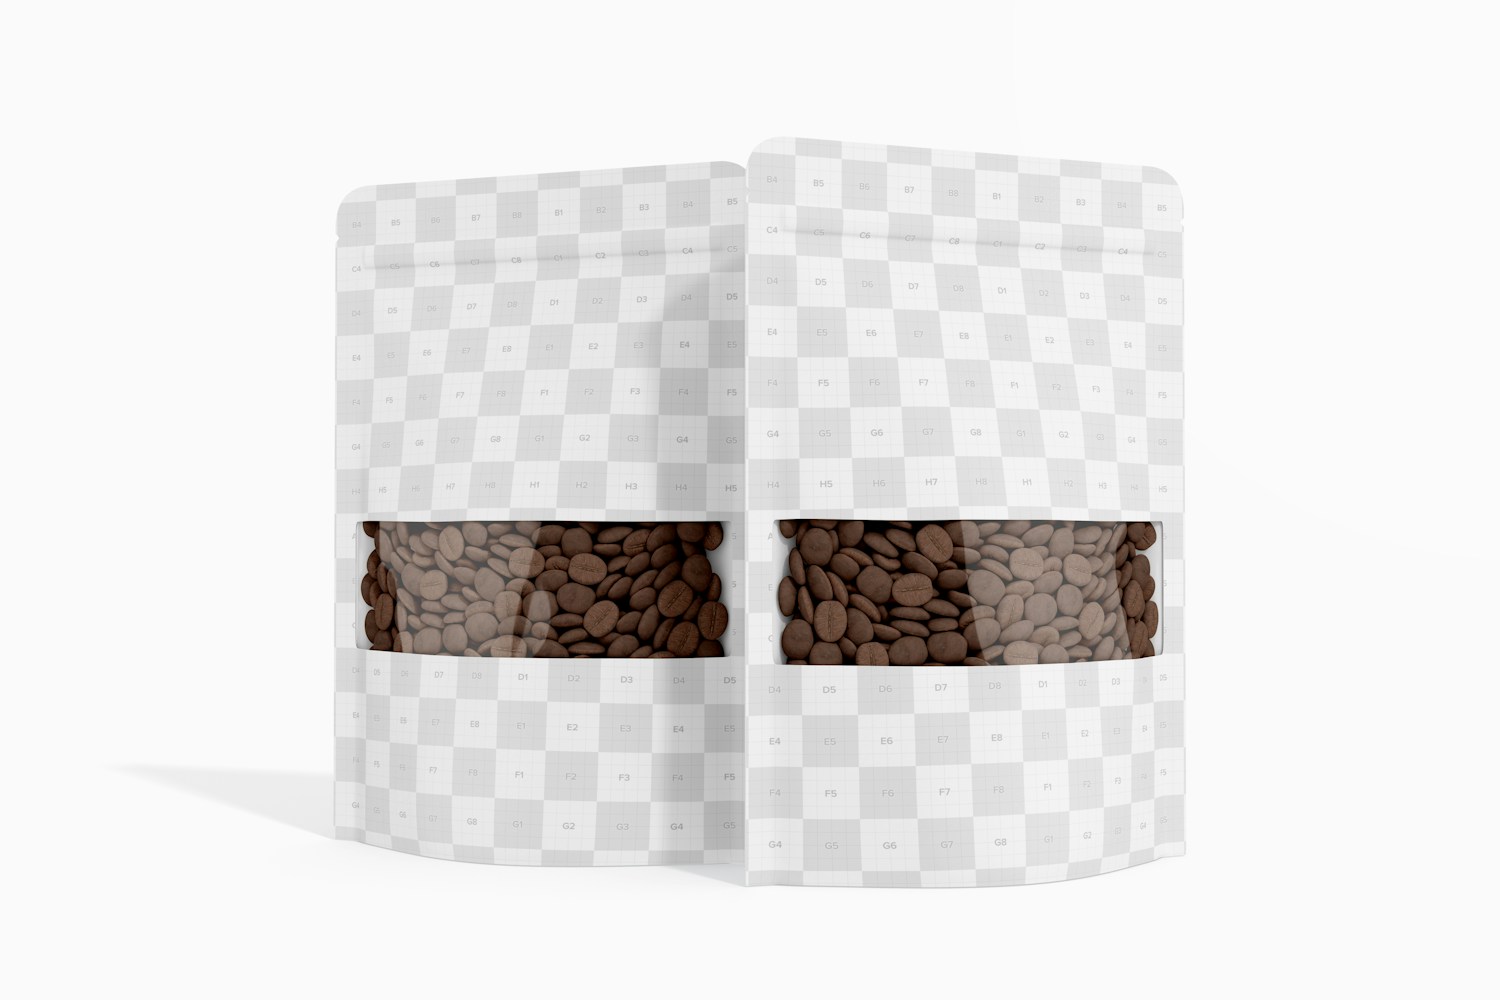 Coffee Pouch Bags Mockup, Left and Right View